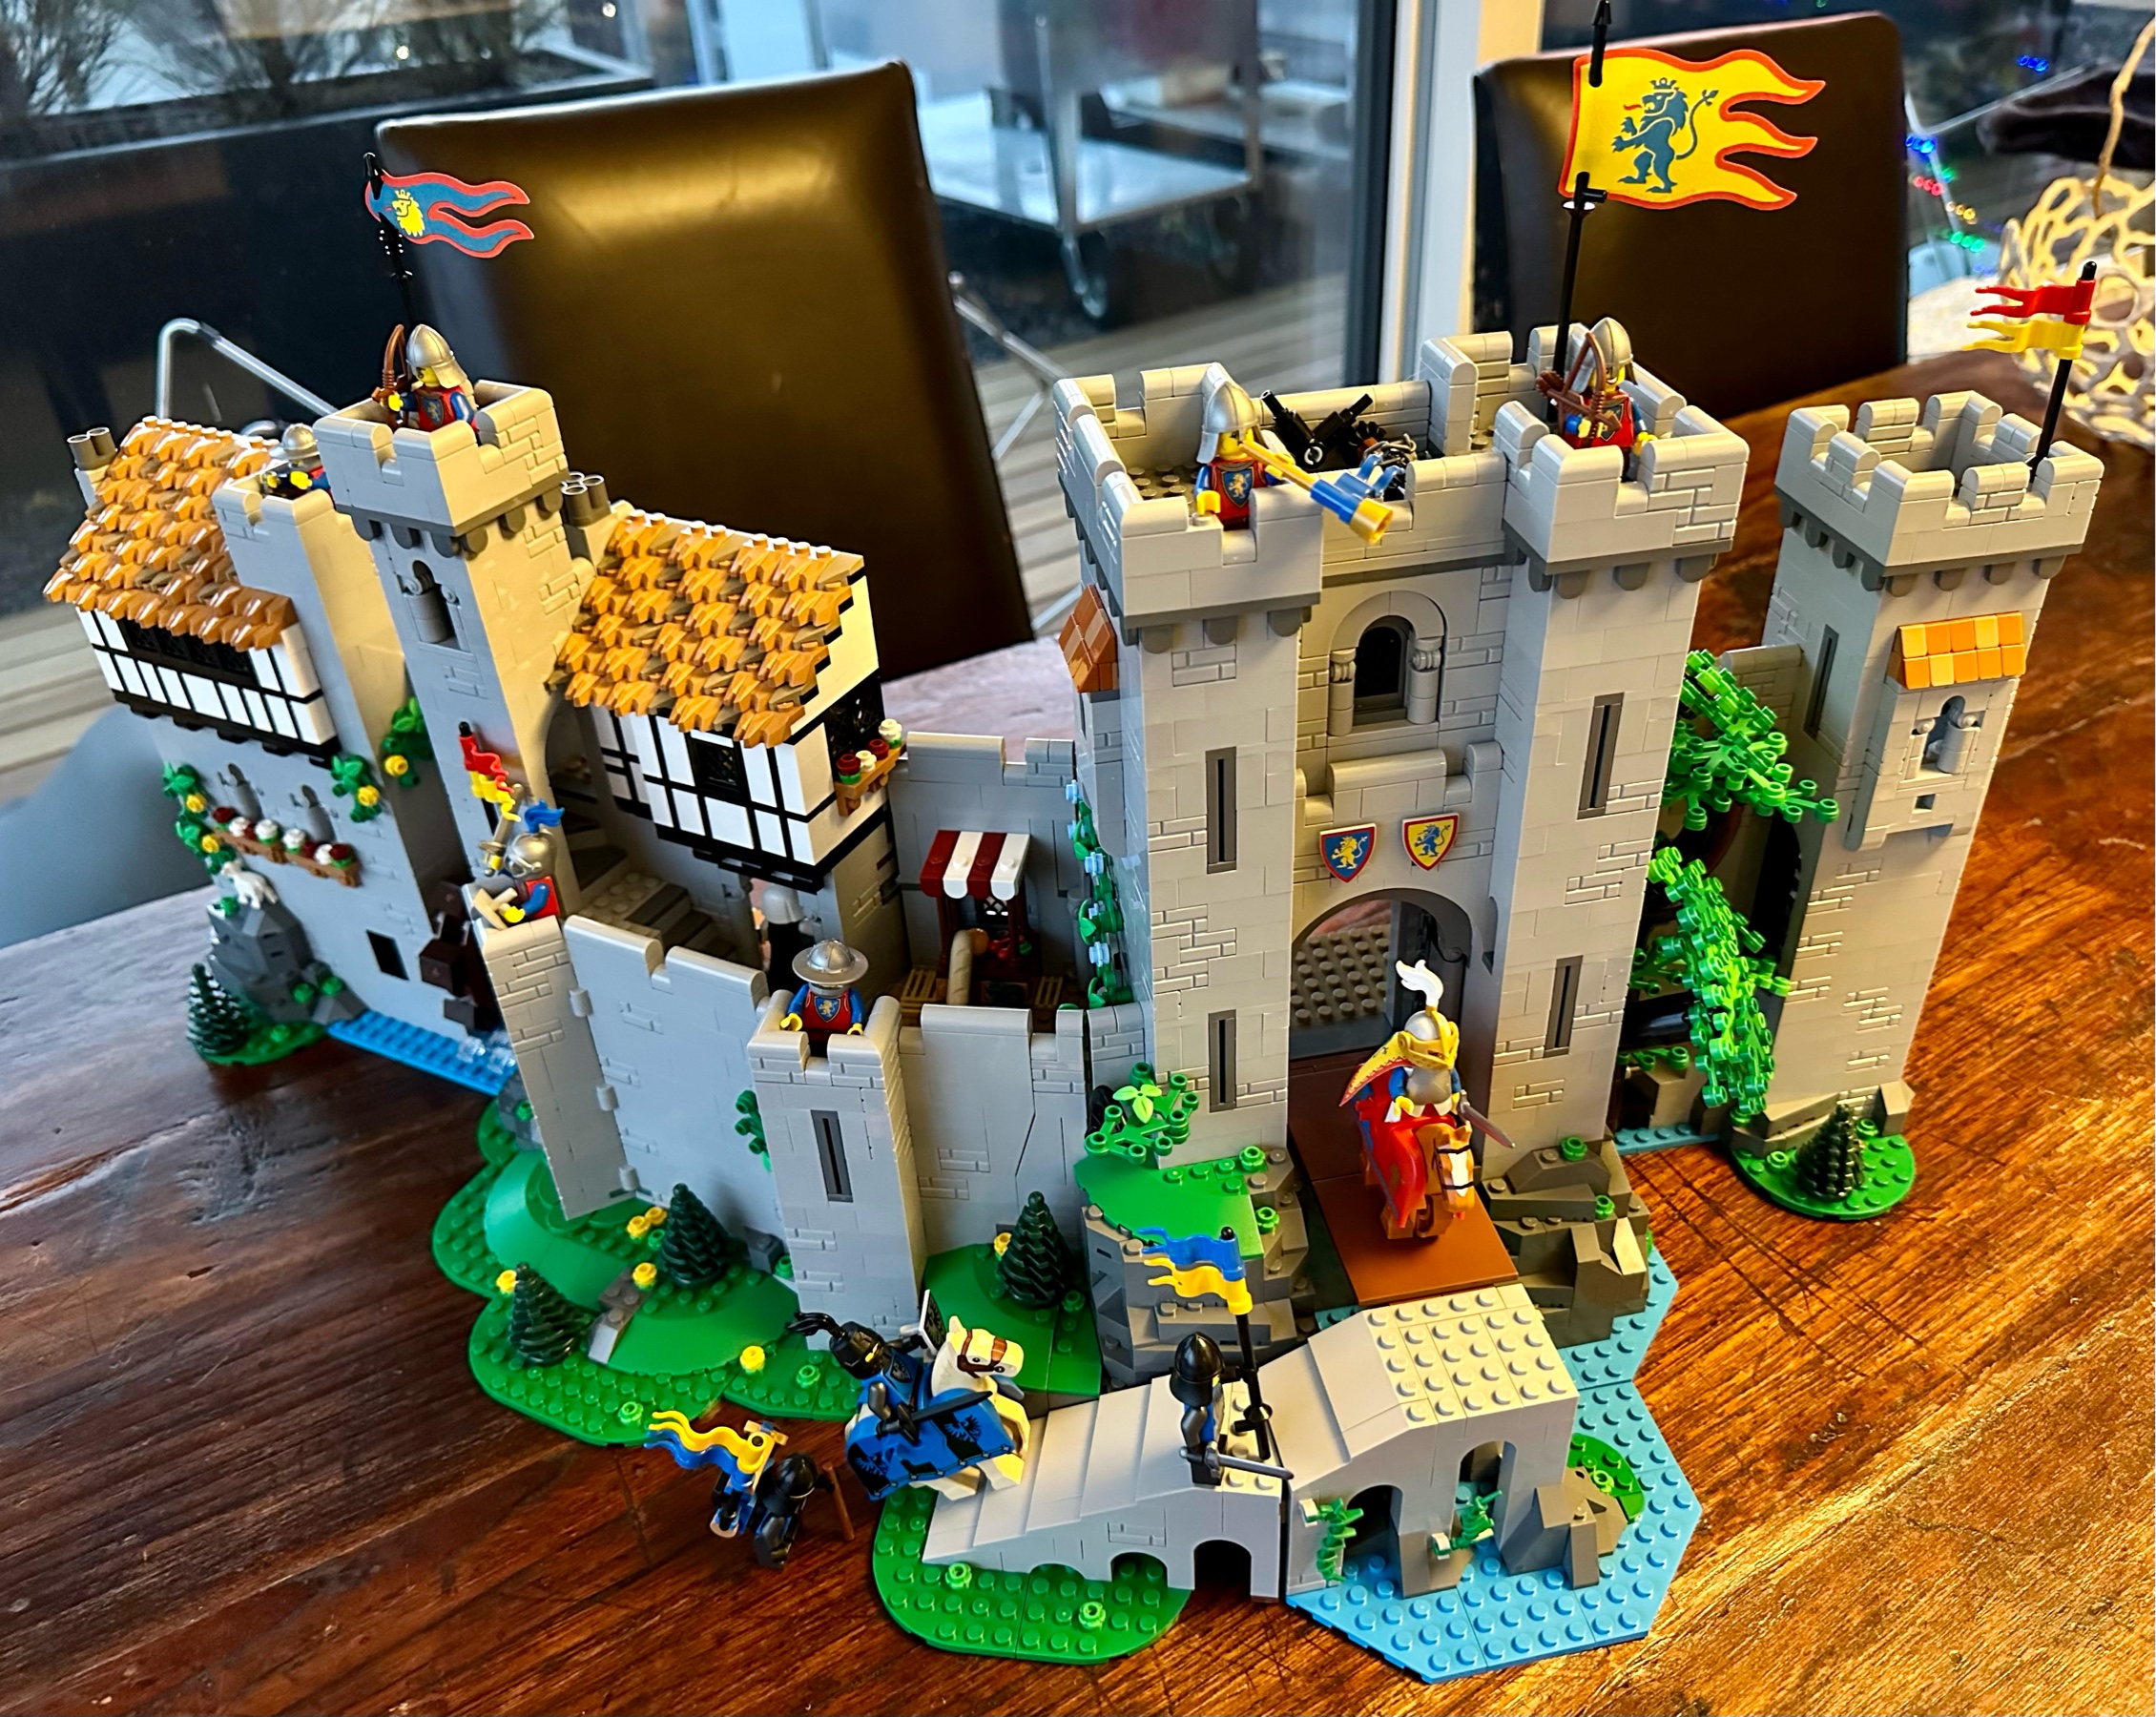 LEGO castle expanded to show a long curtain wall.